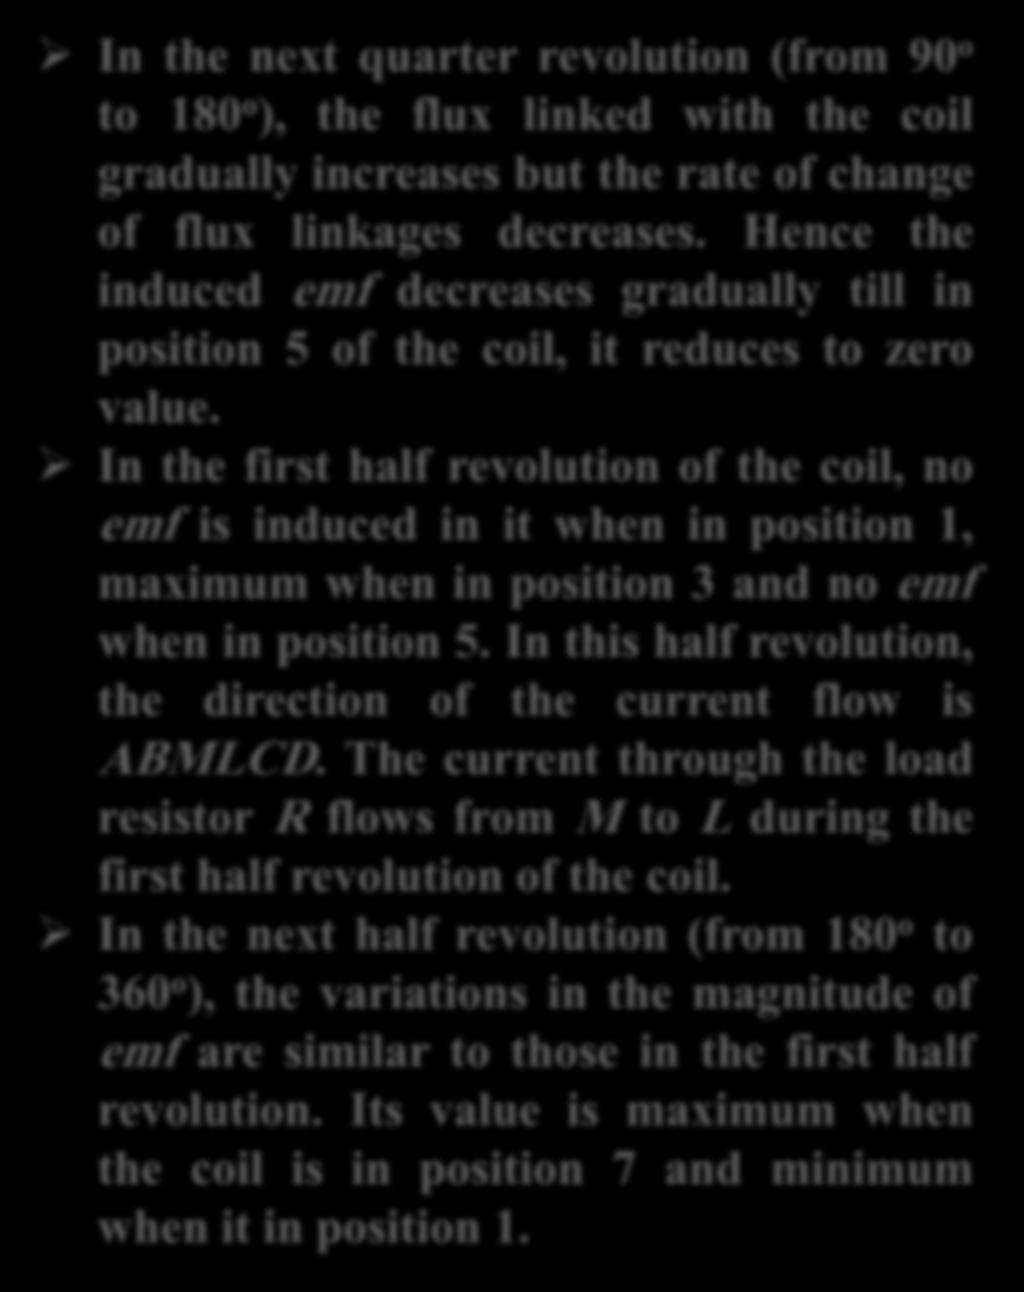 Working of Simple Loop Generator In the next quarter revolution (from 90 o to 180 o ), the flux linked with the coil gradually increases but the rate of change of flux linkages decreases.